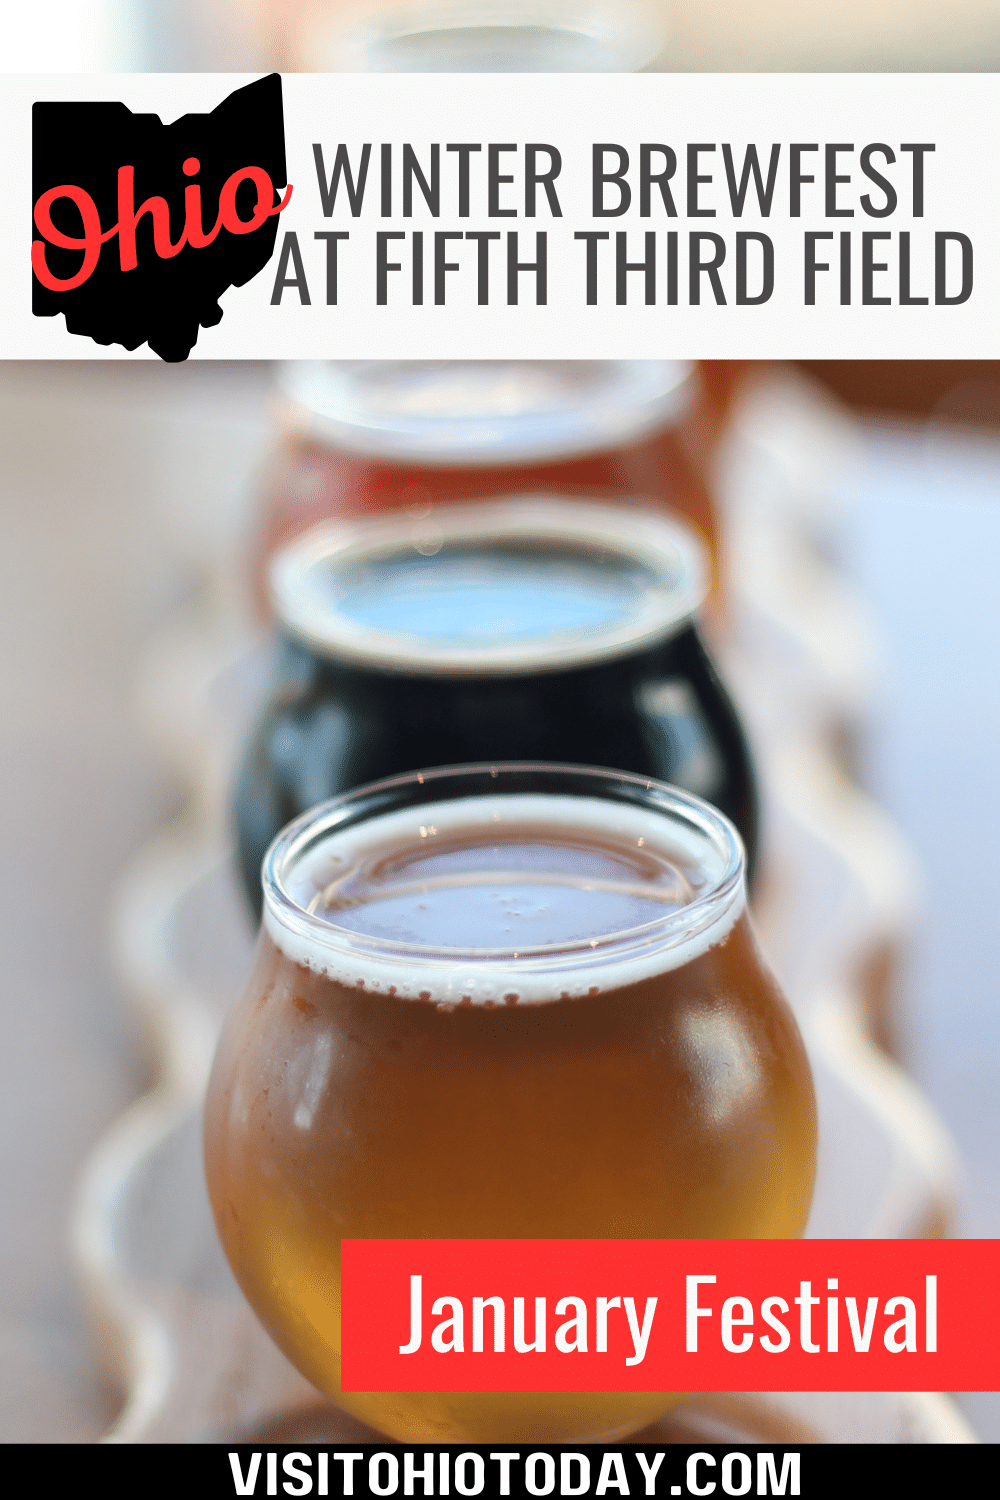 Winter Brewfest at Fifth Third Field is held at the Mudhens baseball ground in Toledo in late January.